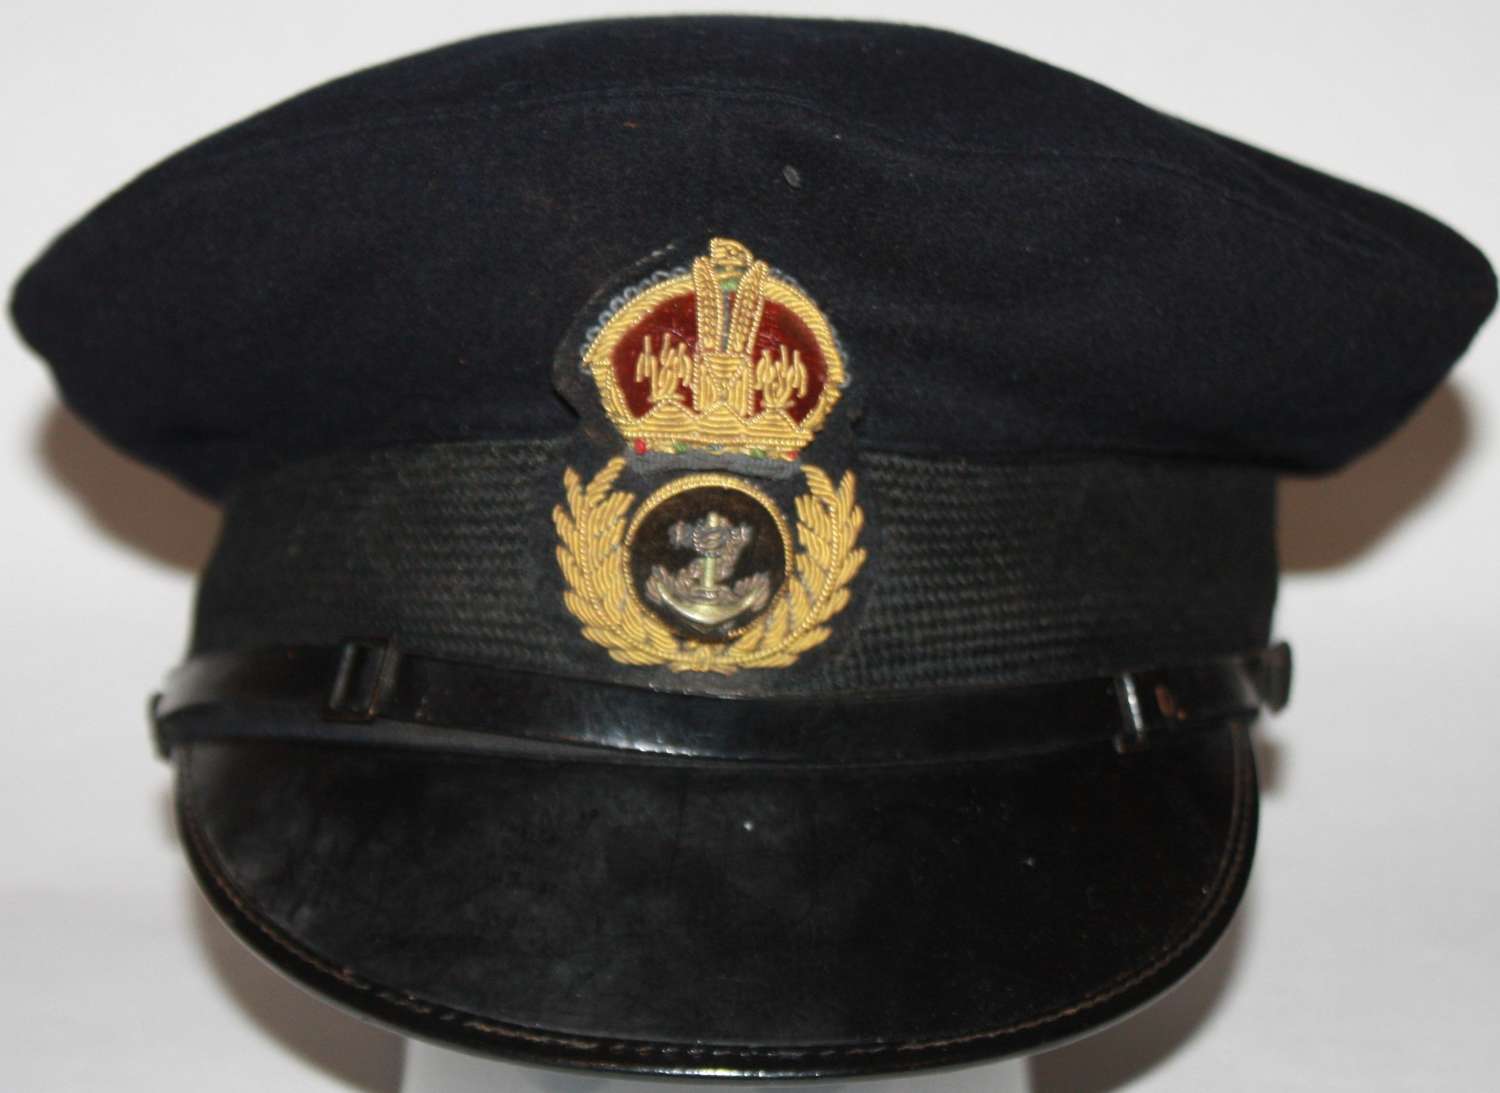 A VERY GOOD EARLY WWII CHIEF PETTEY OFFICERS PEAKED CAP